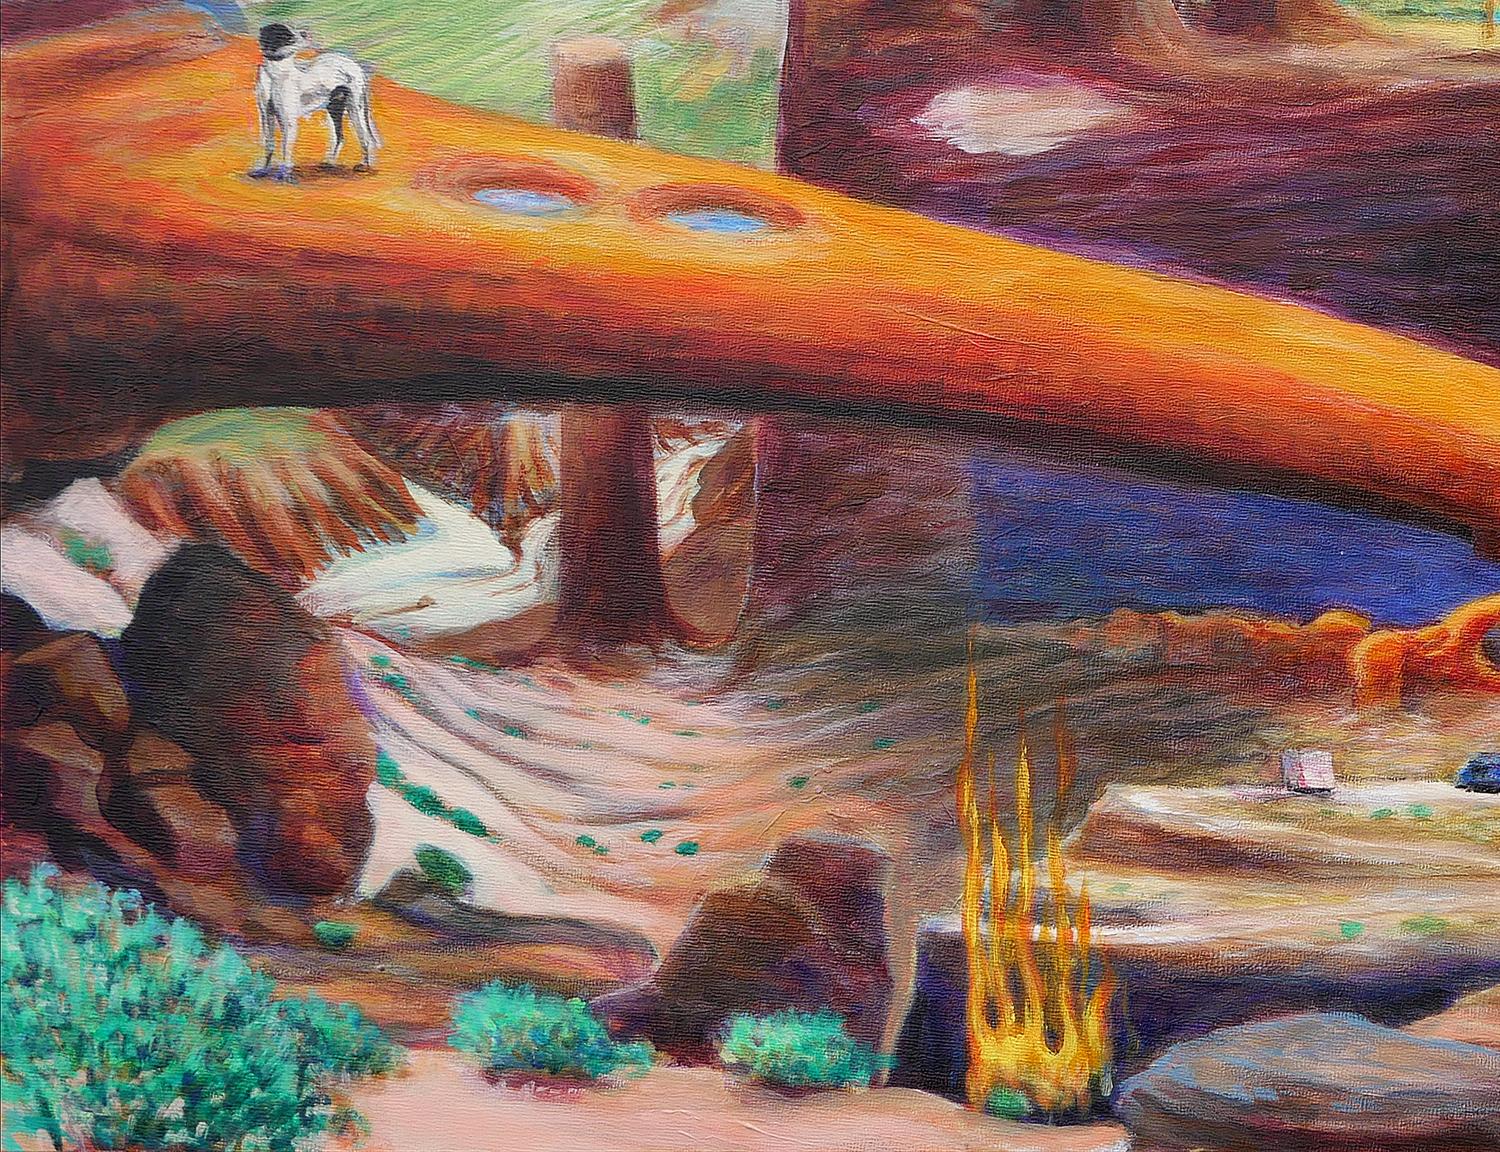 Blue and orange-toned surrealistic landscape by artist Charles E. Watson. The painting depicts a long, orange bridge connecting arid lands with distinct features such as a waterfall, a plateau with trees, and an architectural structure/building. The